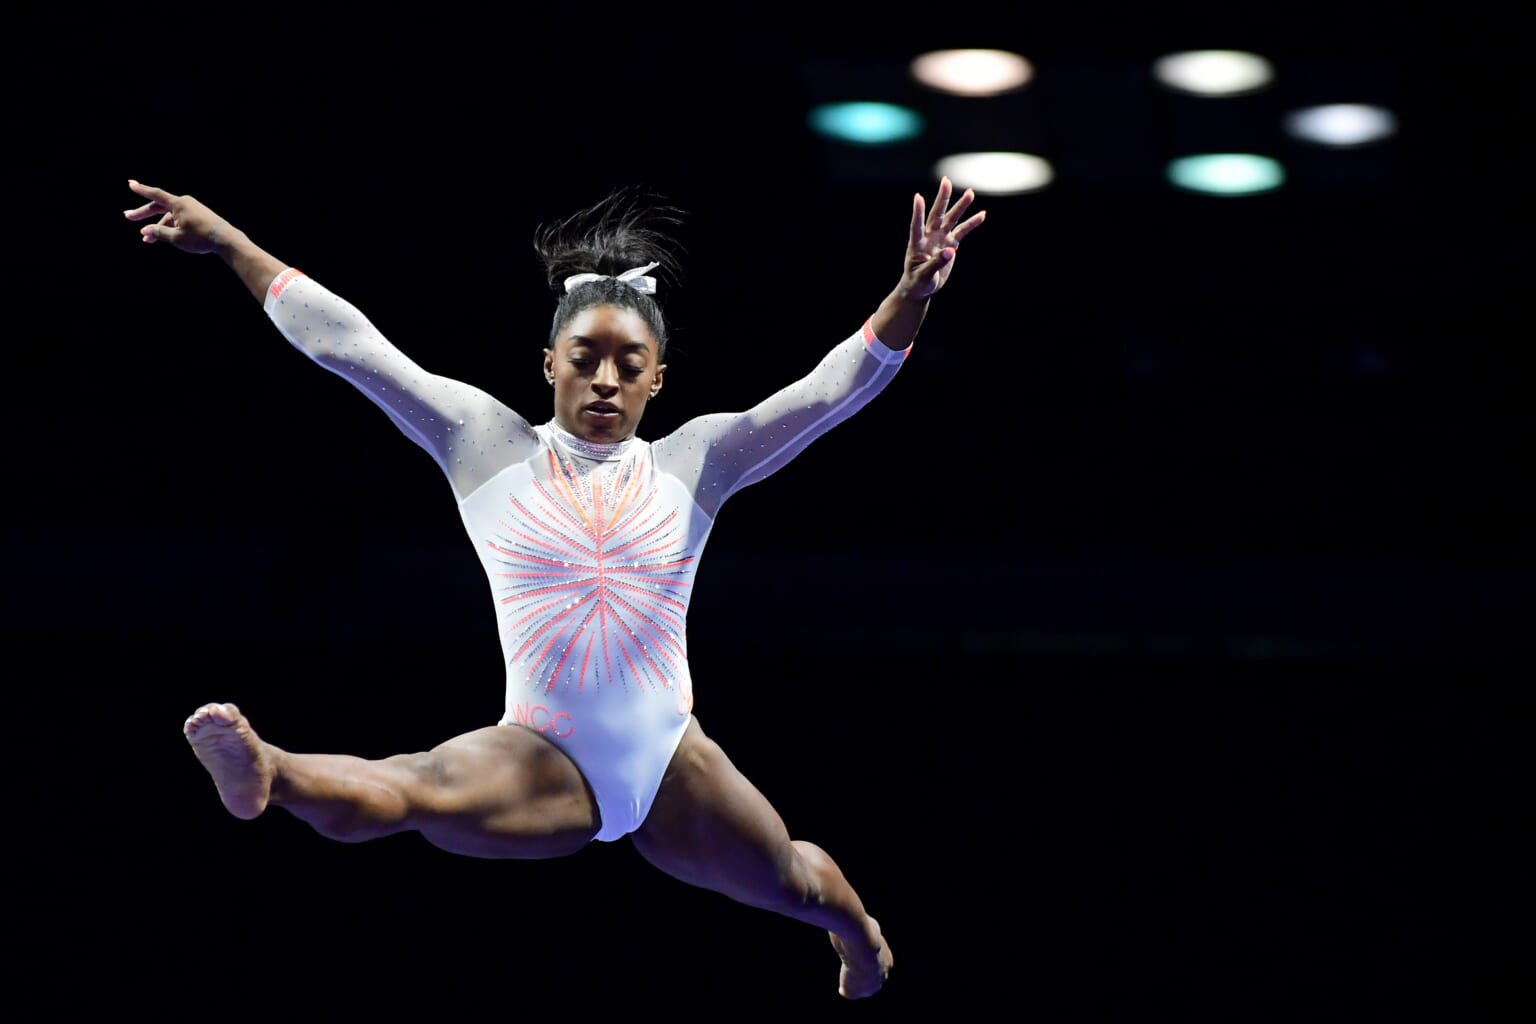 Simone Biles says she performed difficult vault routine 'because I can'